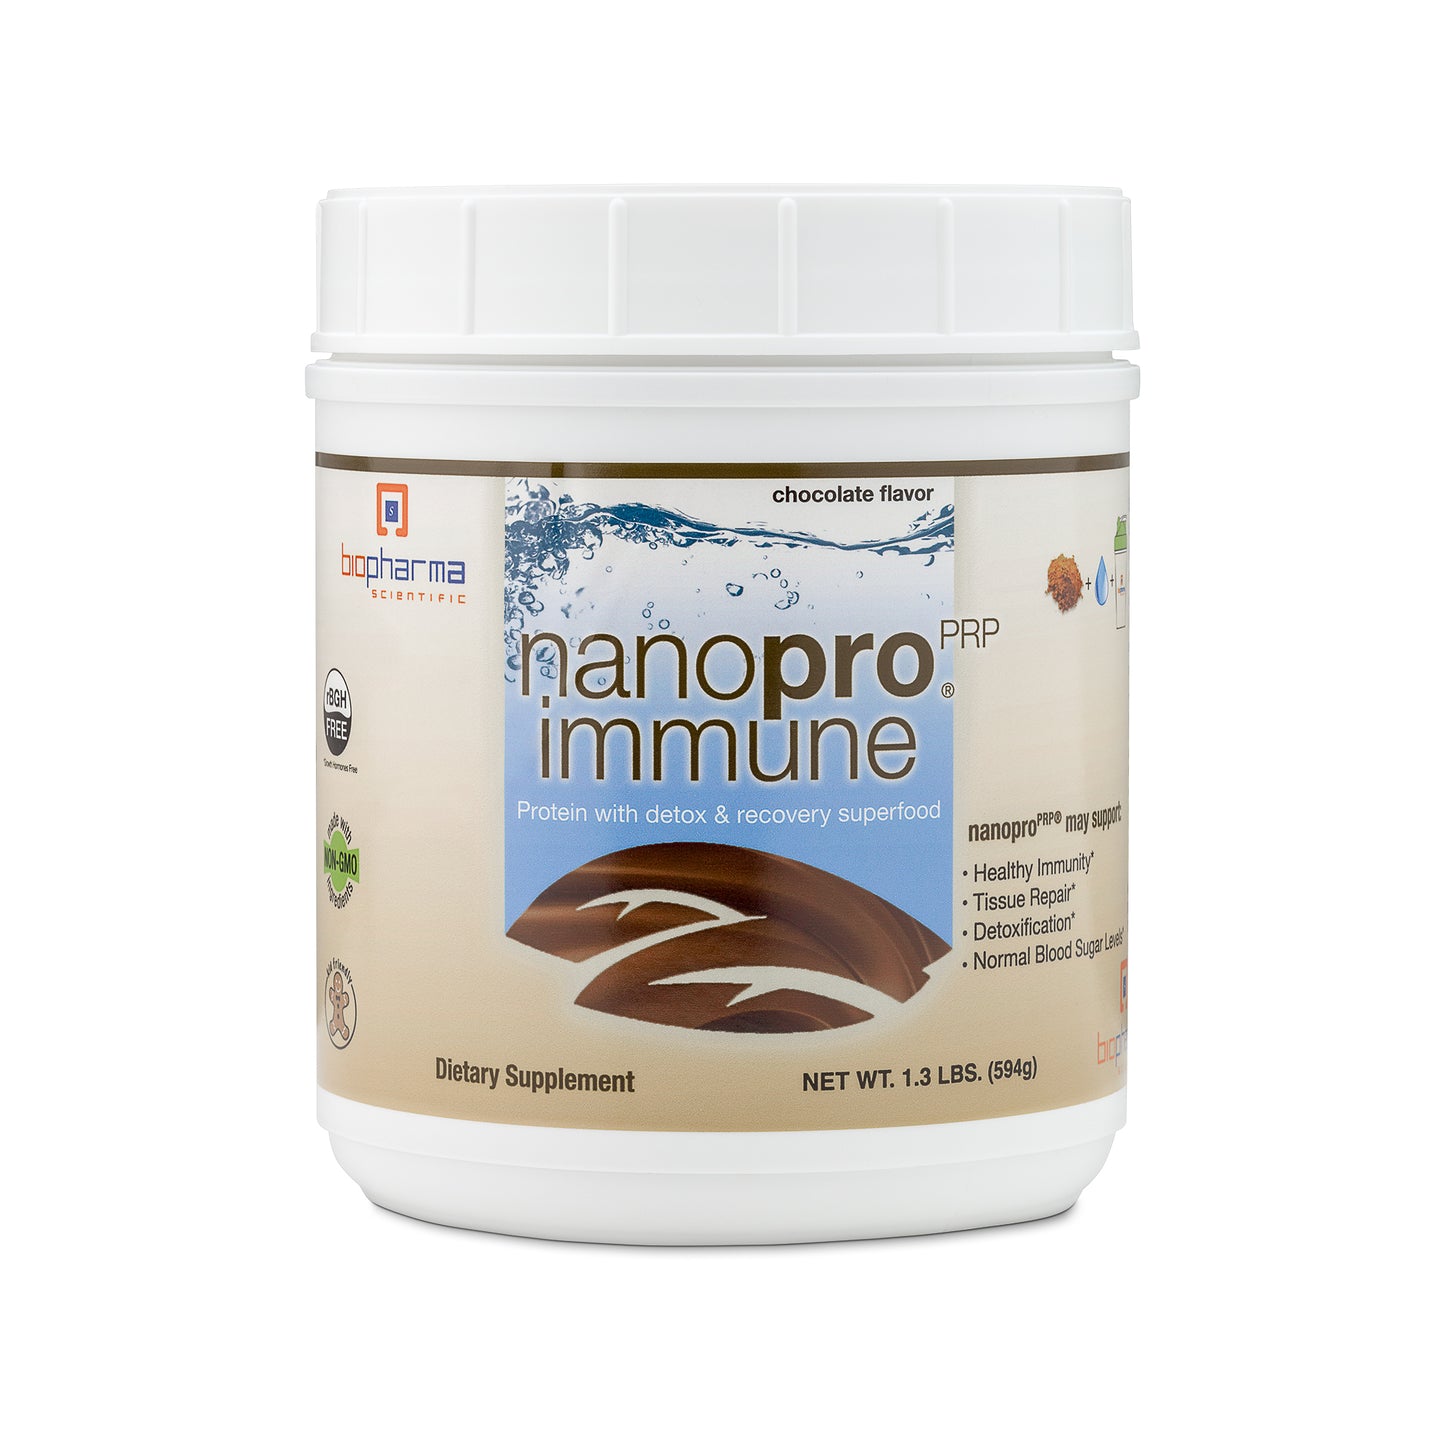 nanopro immune chocolate protein powder supplement with detox and recovery superfood - front side